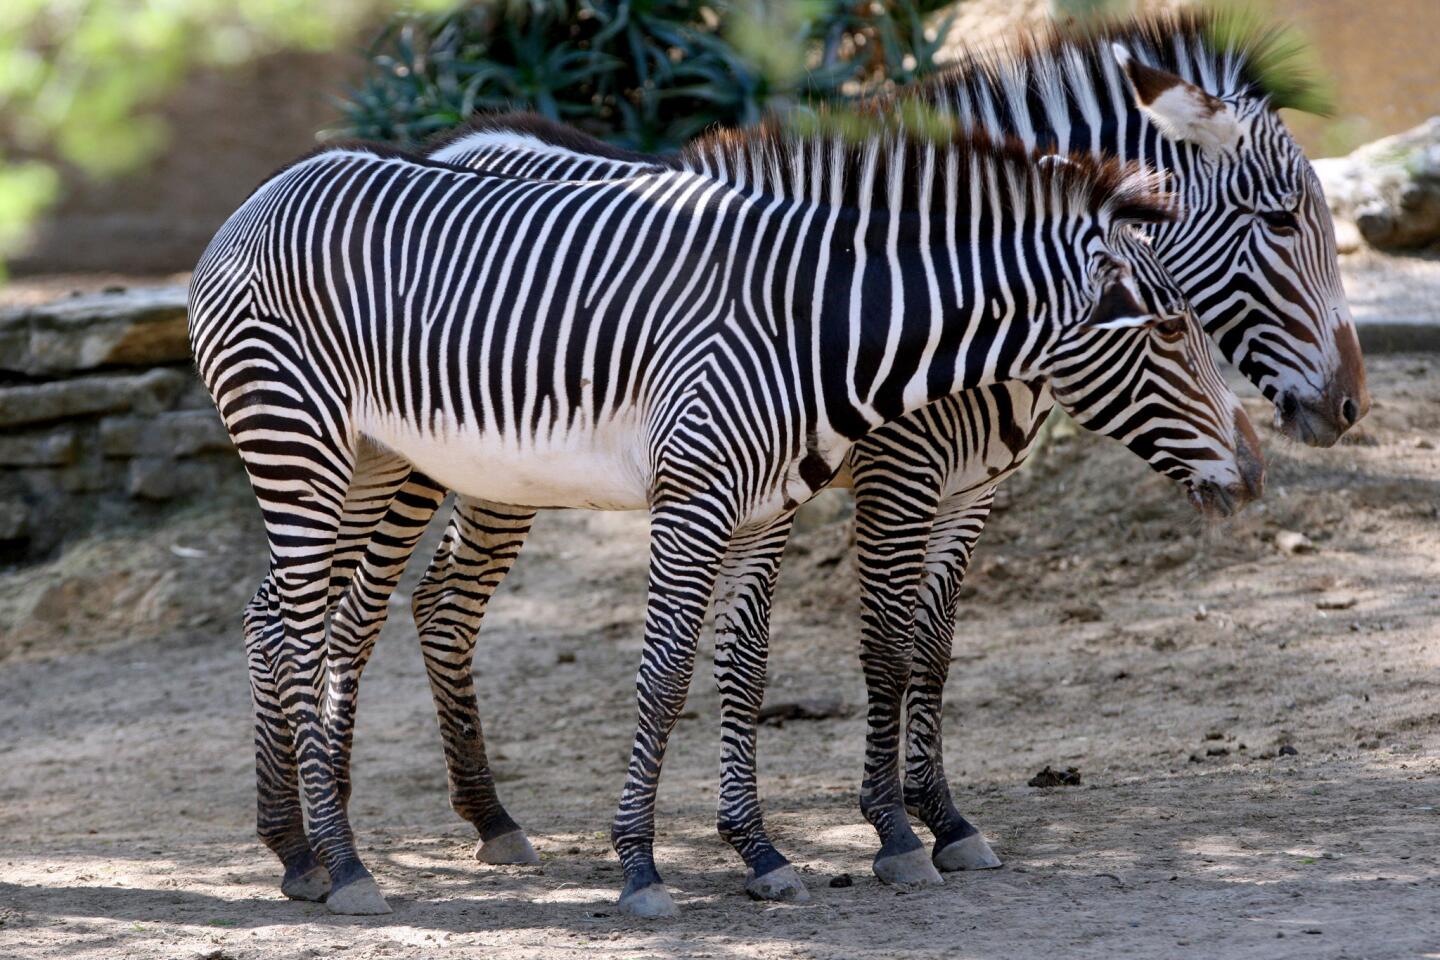 The L.A. Zoo has added four new Grevy's zebras, one male and three females, to their habitat. The zebras were sent to the zoo as part of a breeding recommendation from the Assn. of Zoo's and Aquarium's Species Survival Program. The habitat had been empty for five months after the previous zebras were sent to other zoos. Zoo officials hope this new breeding roup will produce offspring.